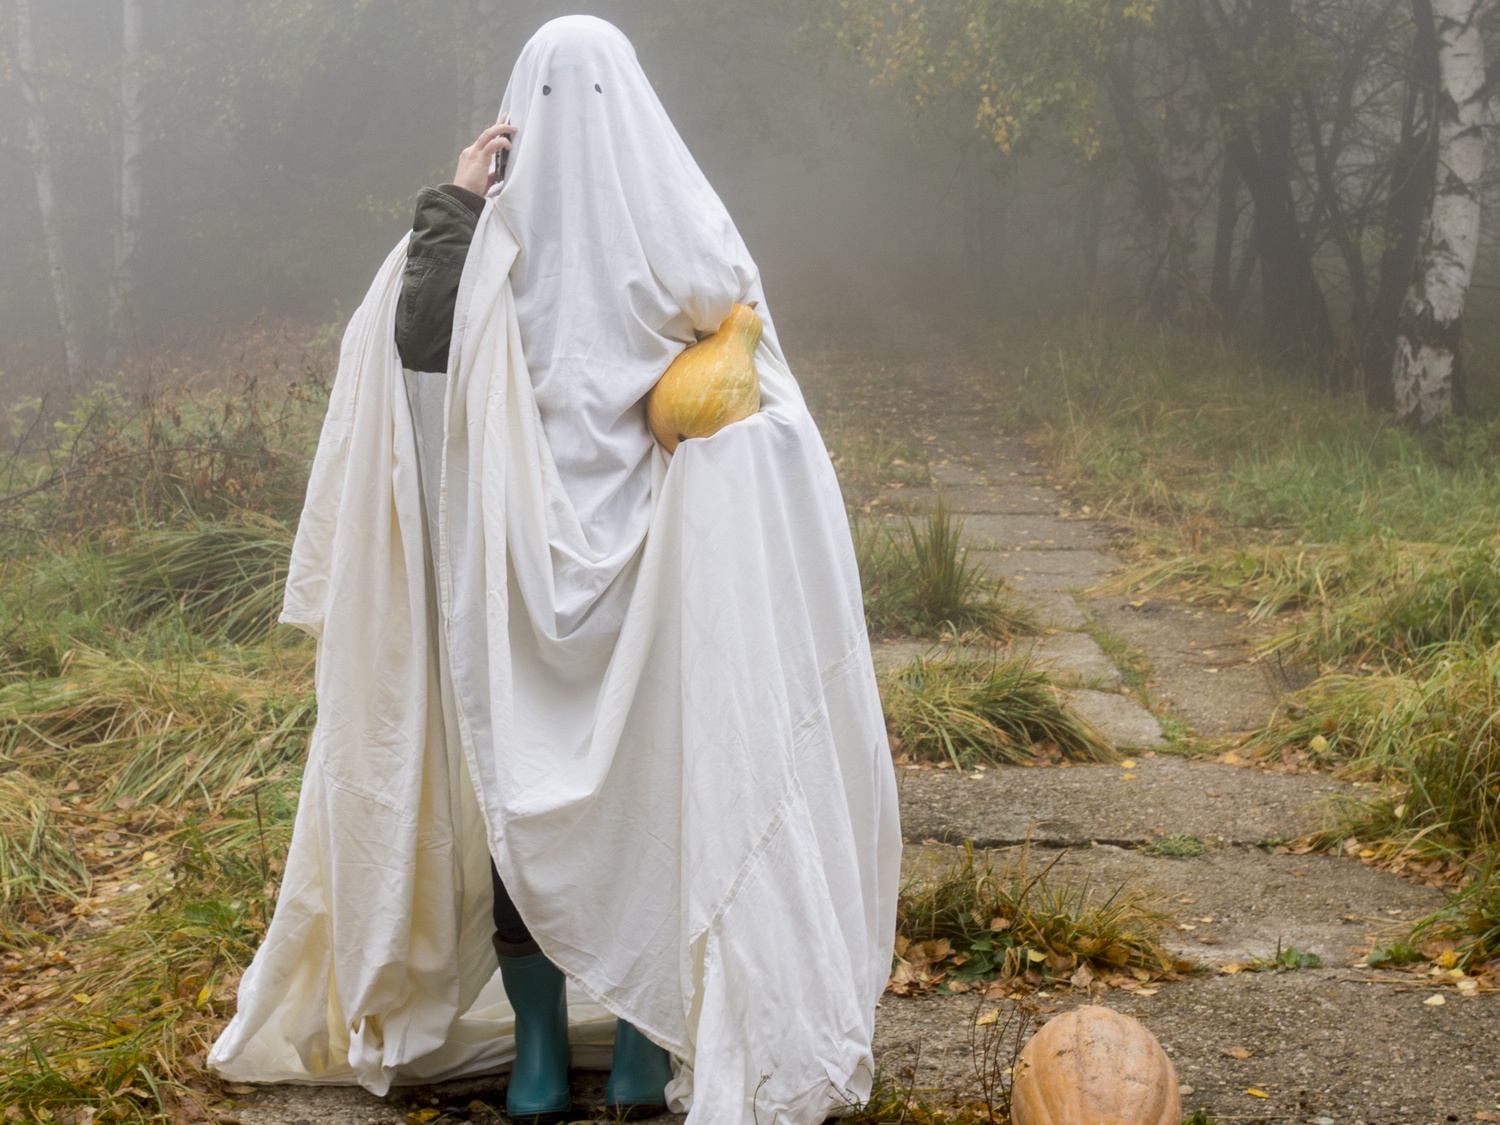 Generic photo of woman wearing white sheets to look like a ghost (Thinkstock/PA)